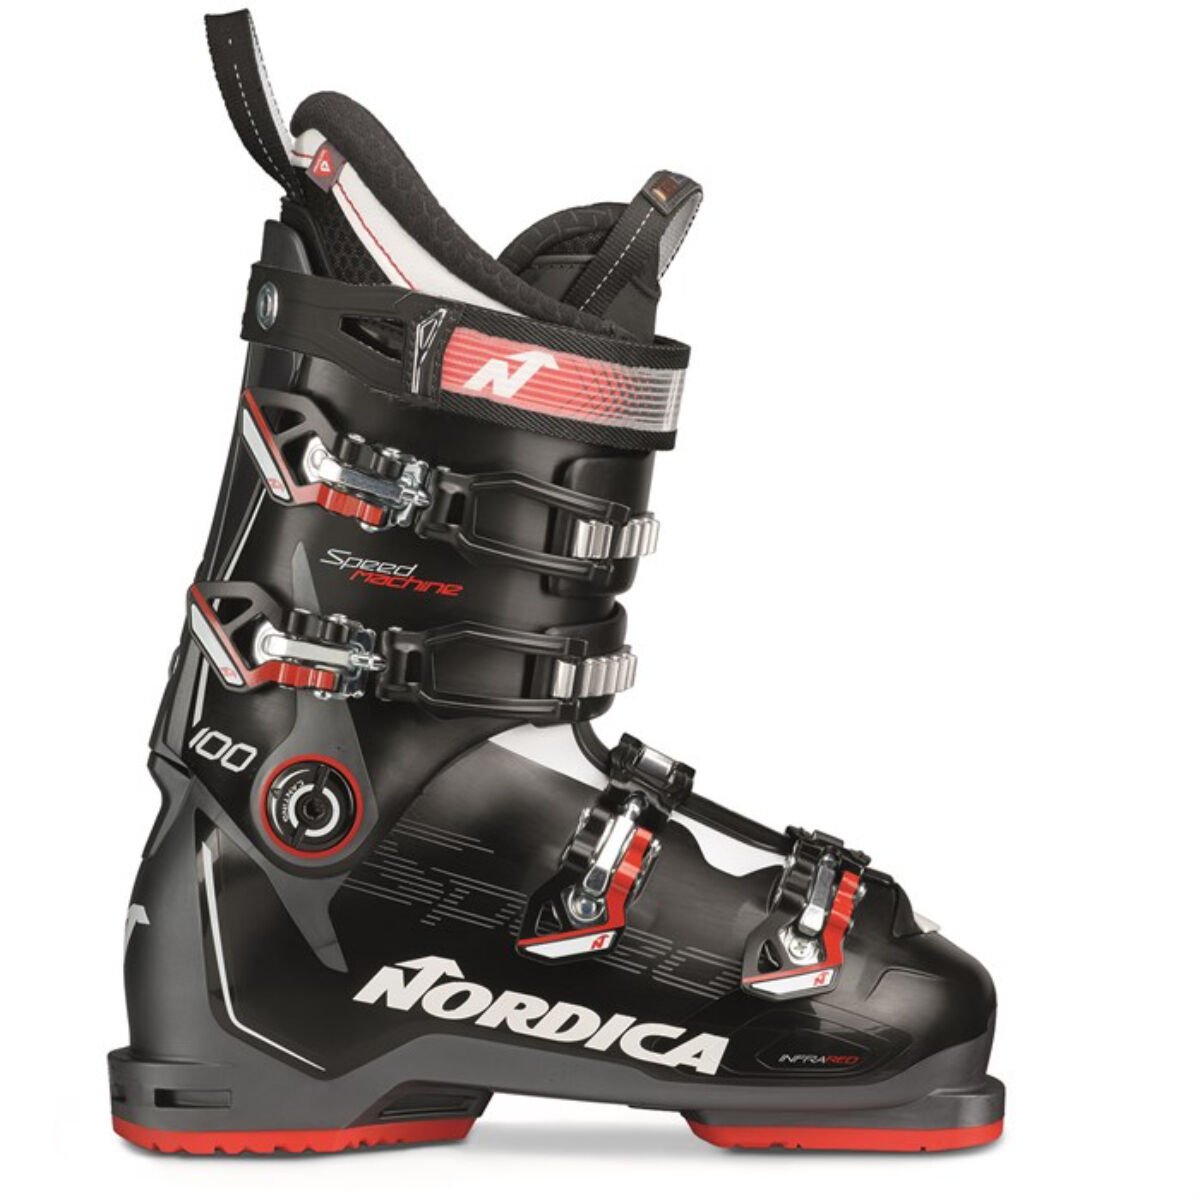 Nordica Skis and Ski Boots - Women's and Men's | Christy Sports